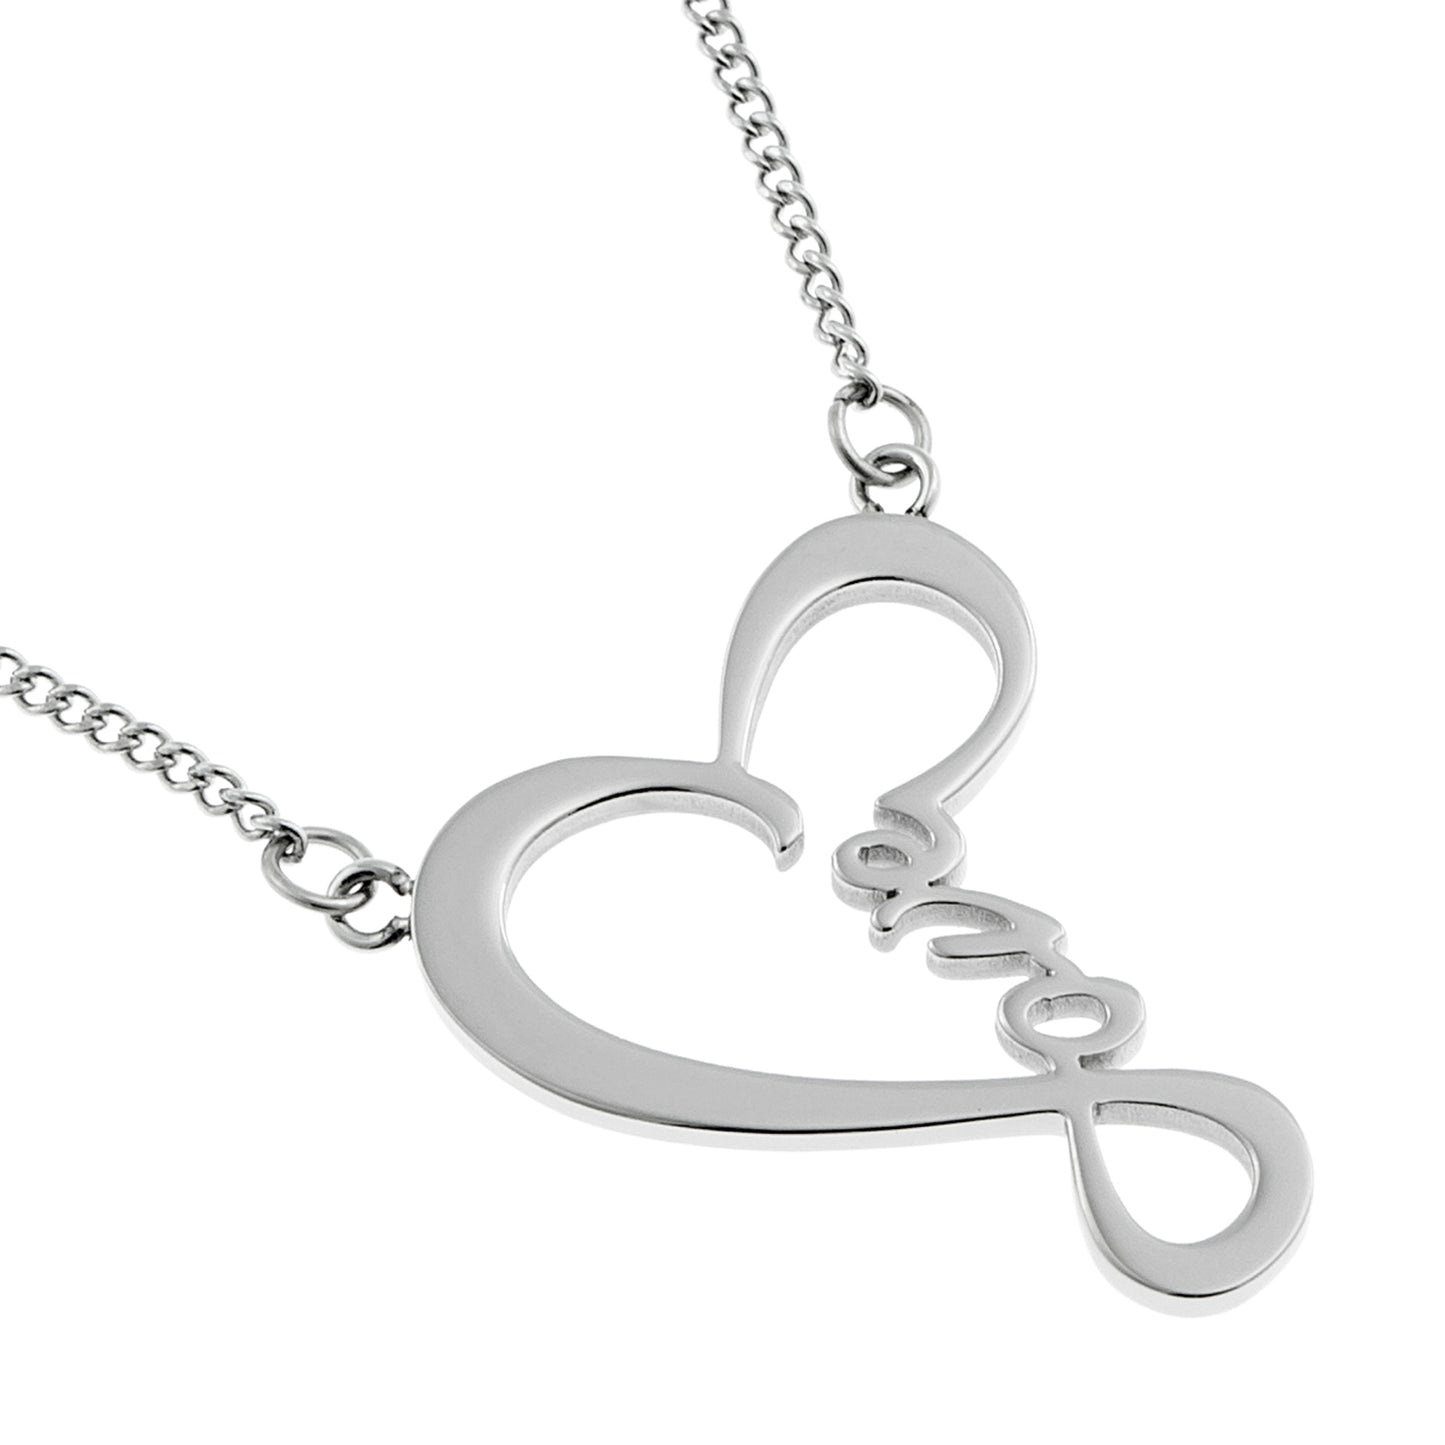 Stainless Steel Script Love Heart Pendant Necklace - Wedding, Anniversary, Romantic Jewelry Gift